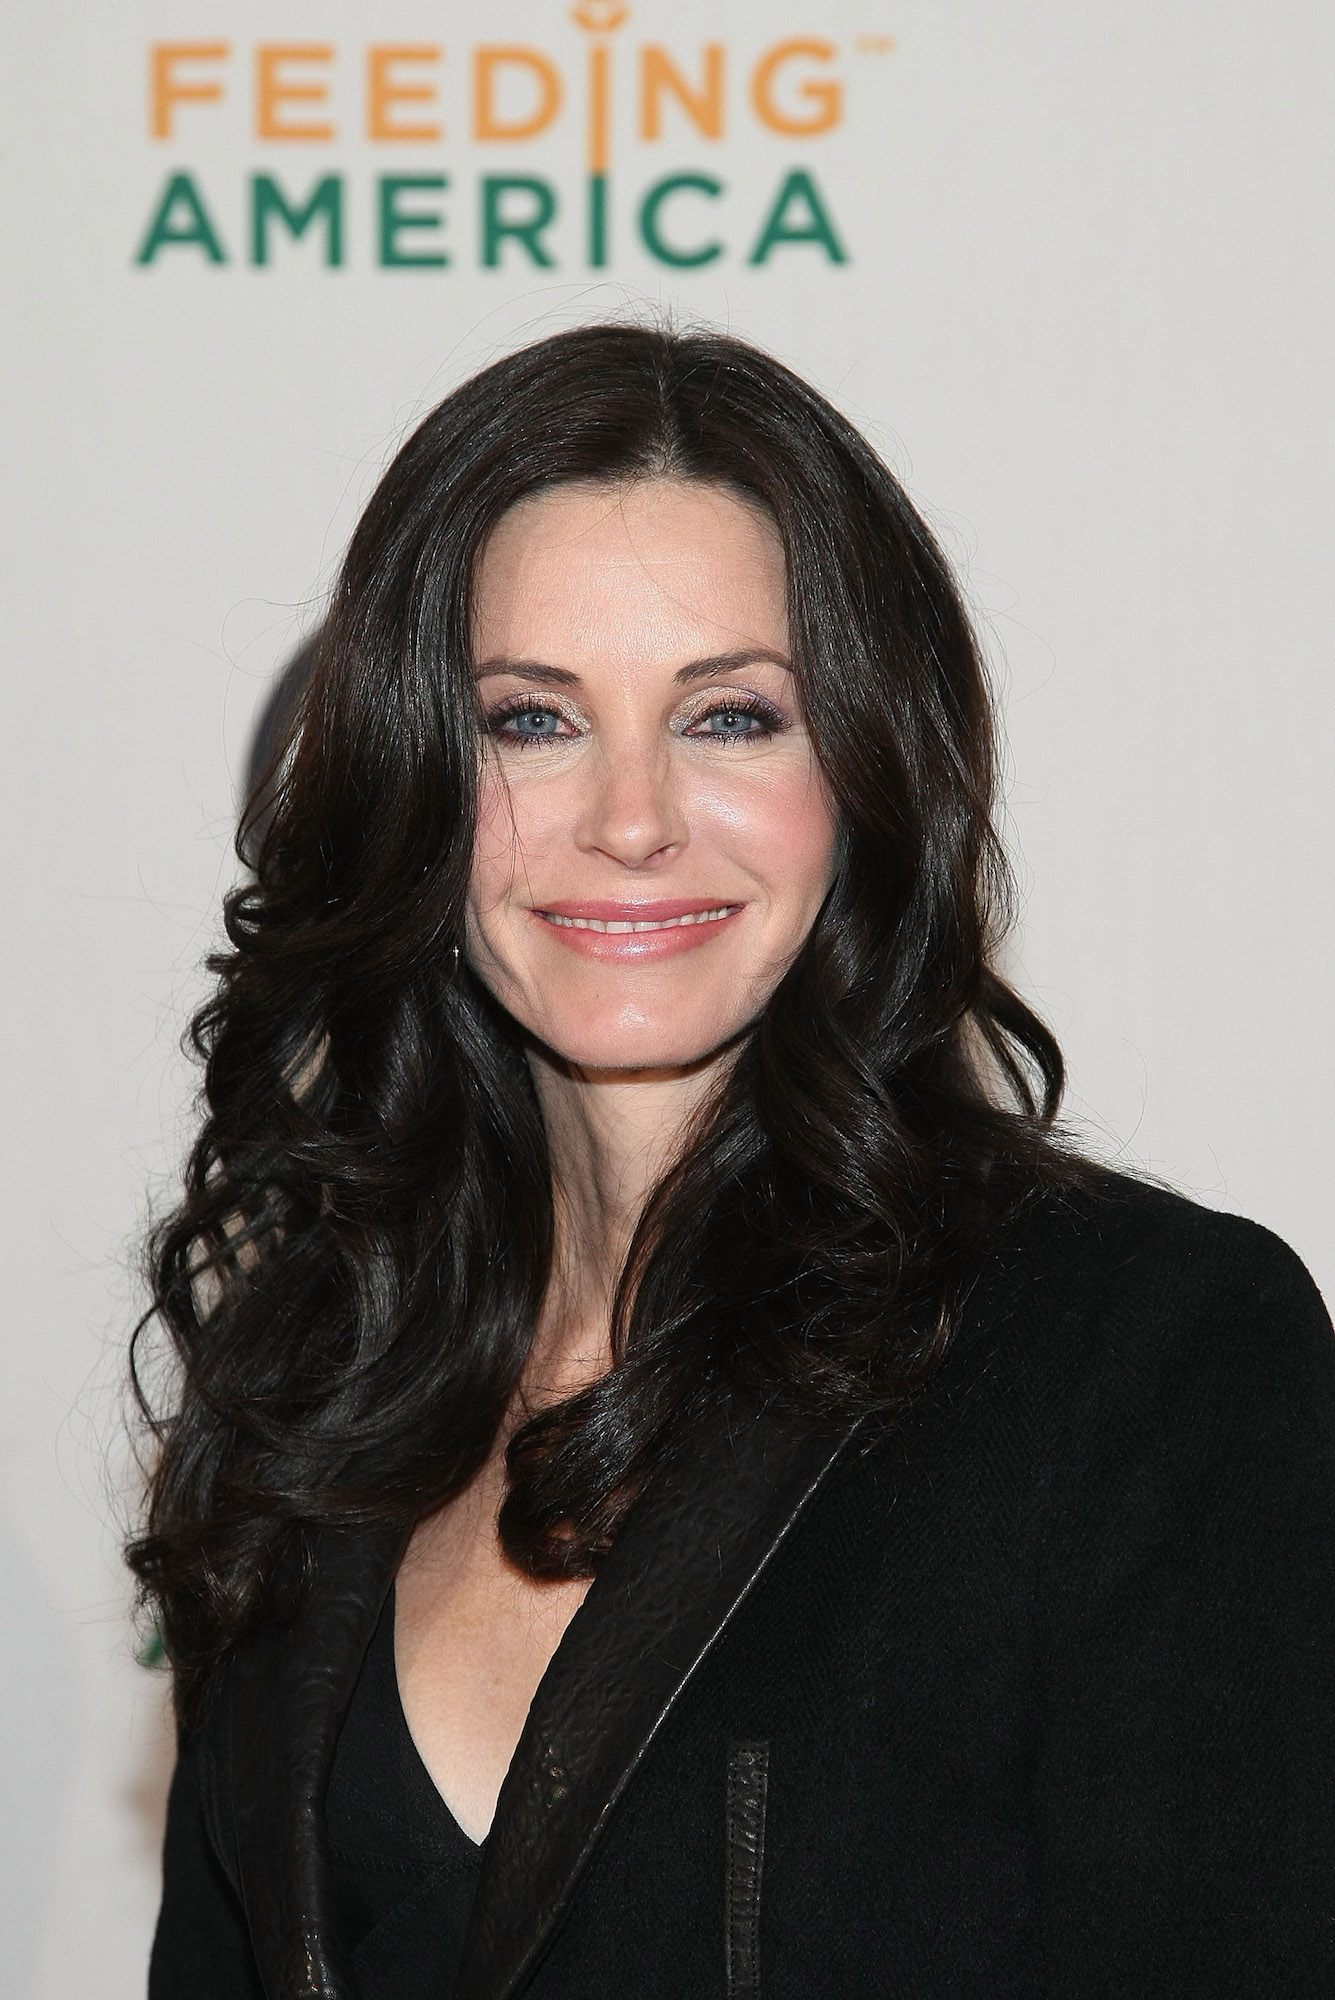 Why Did Courteney Cox Finally Get an Instagram Account?